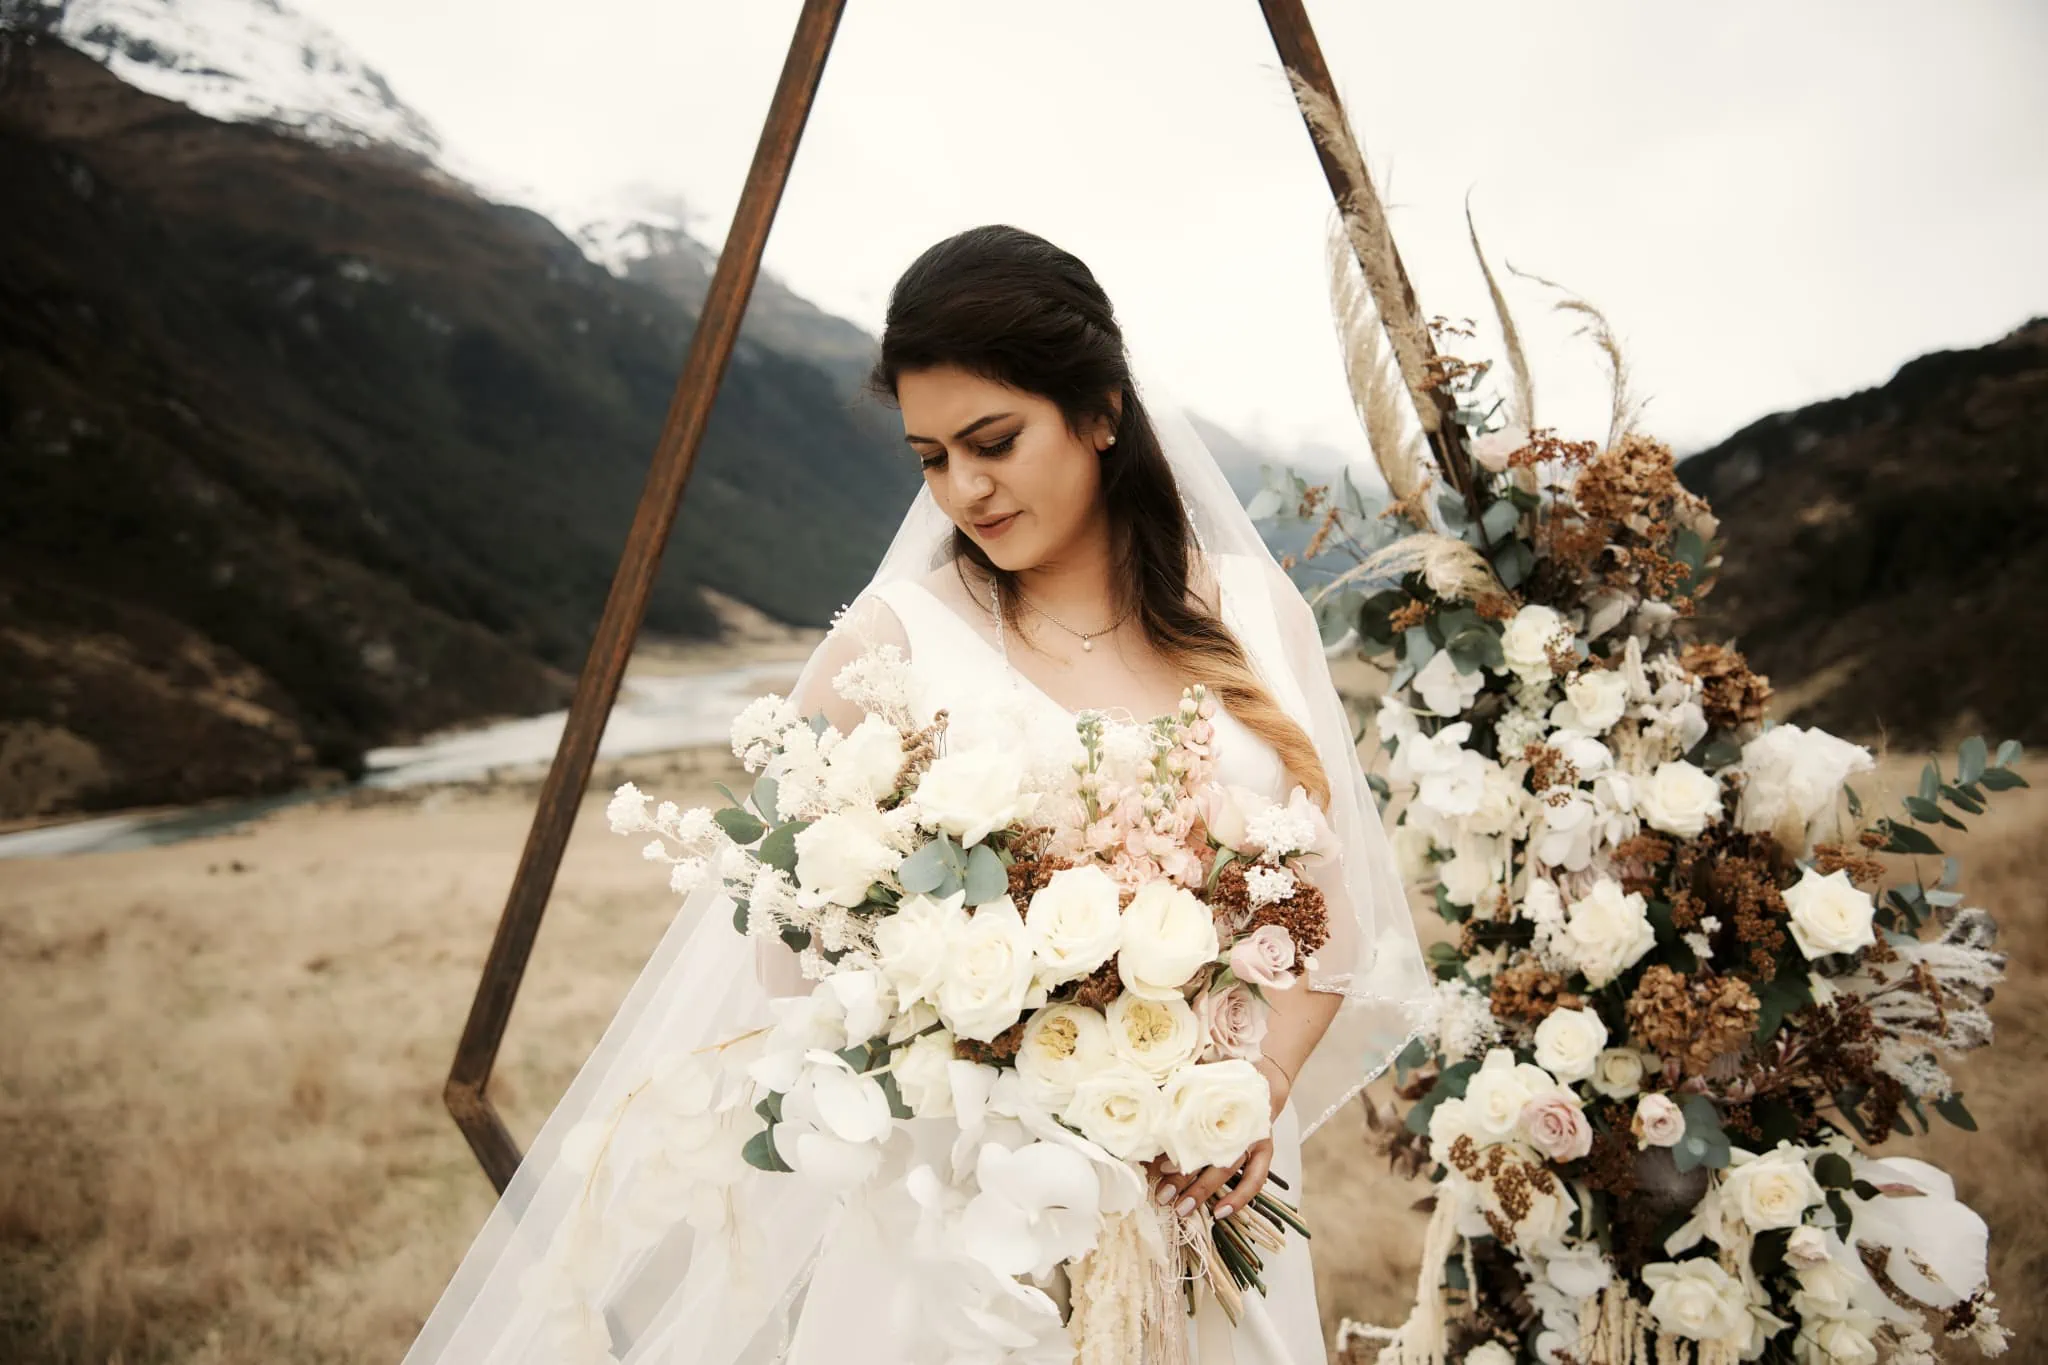 Michelle holding bouquet Mountains Rees Valley Station Elopement Wedding